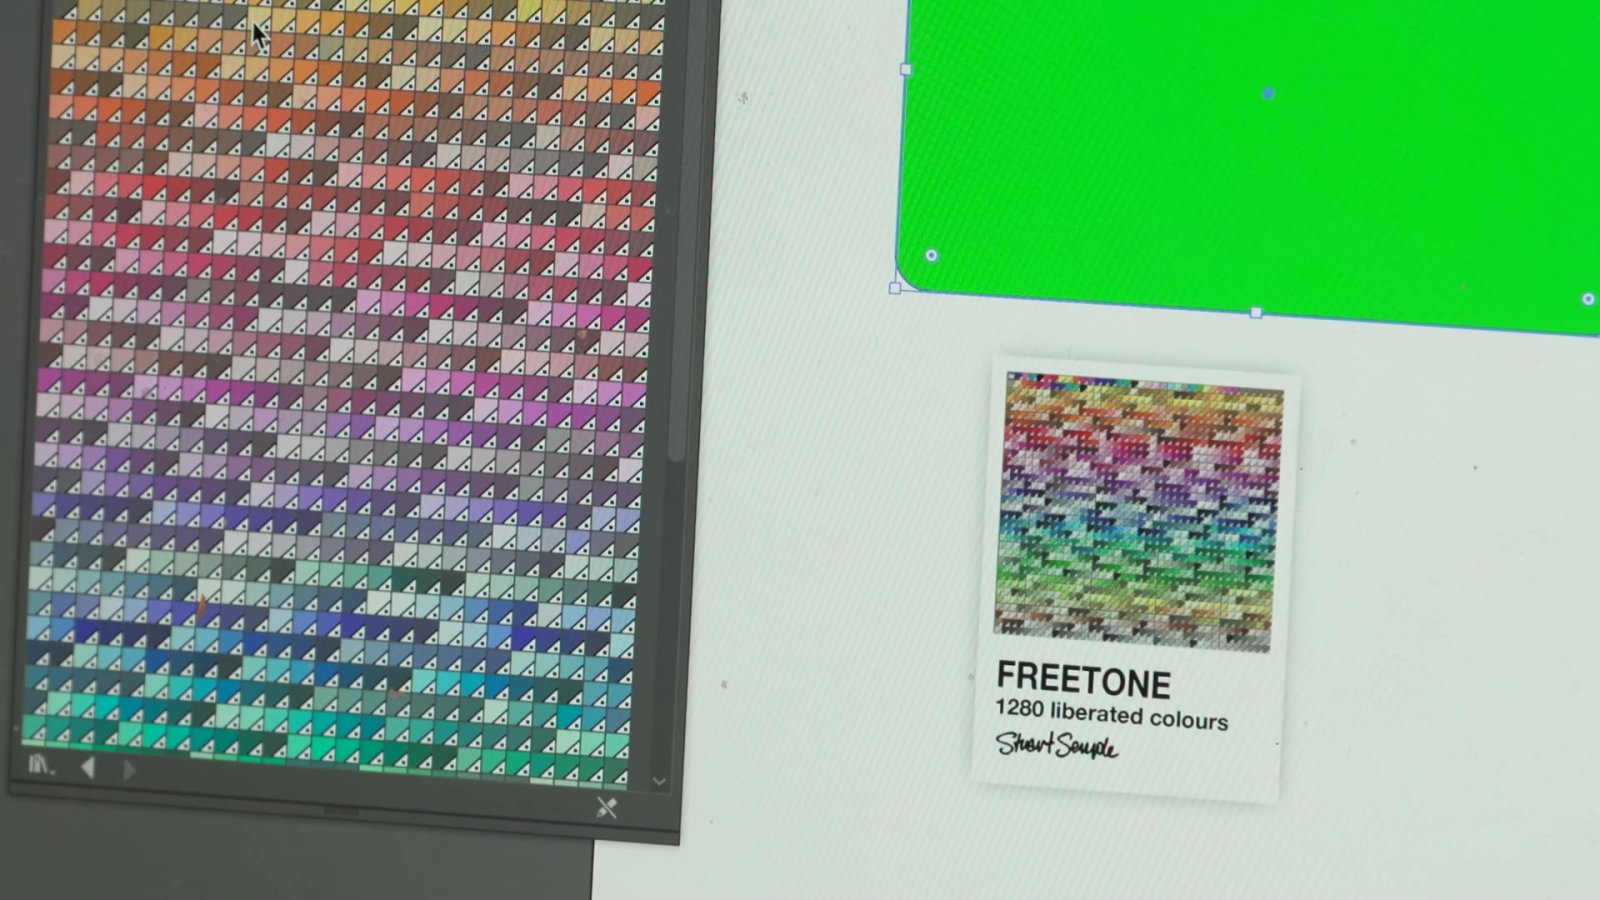 Semple created the ‘Freetone’ plug-in for Adobe users who could no longer access the full range of Pantone colours.